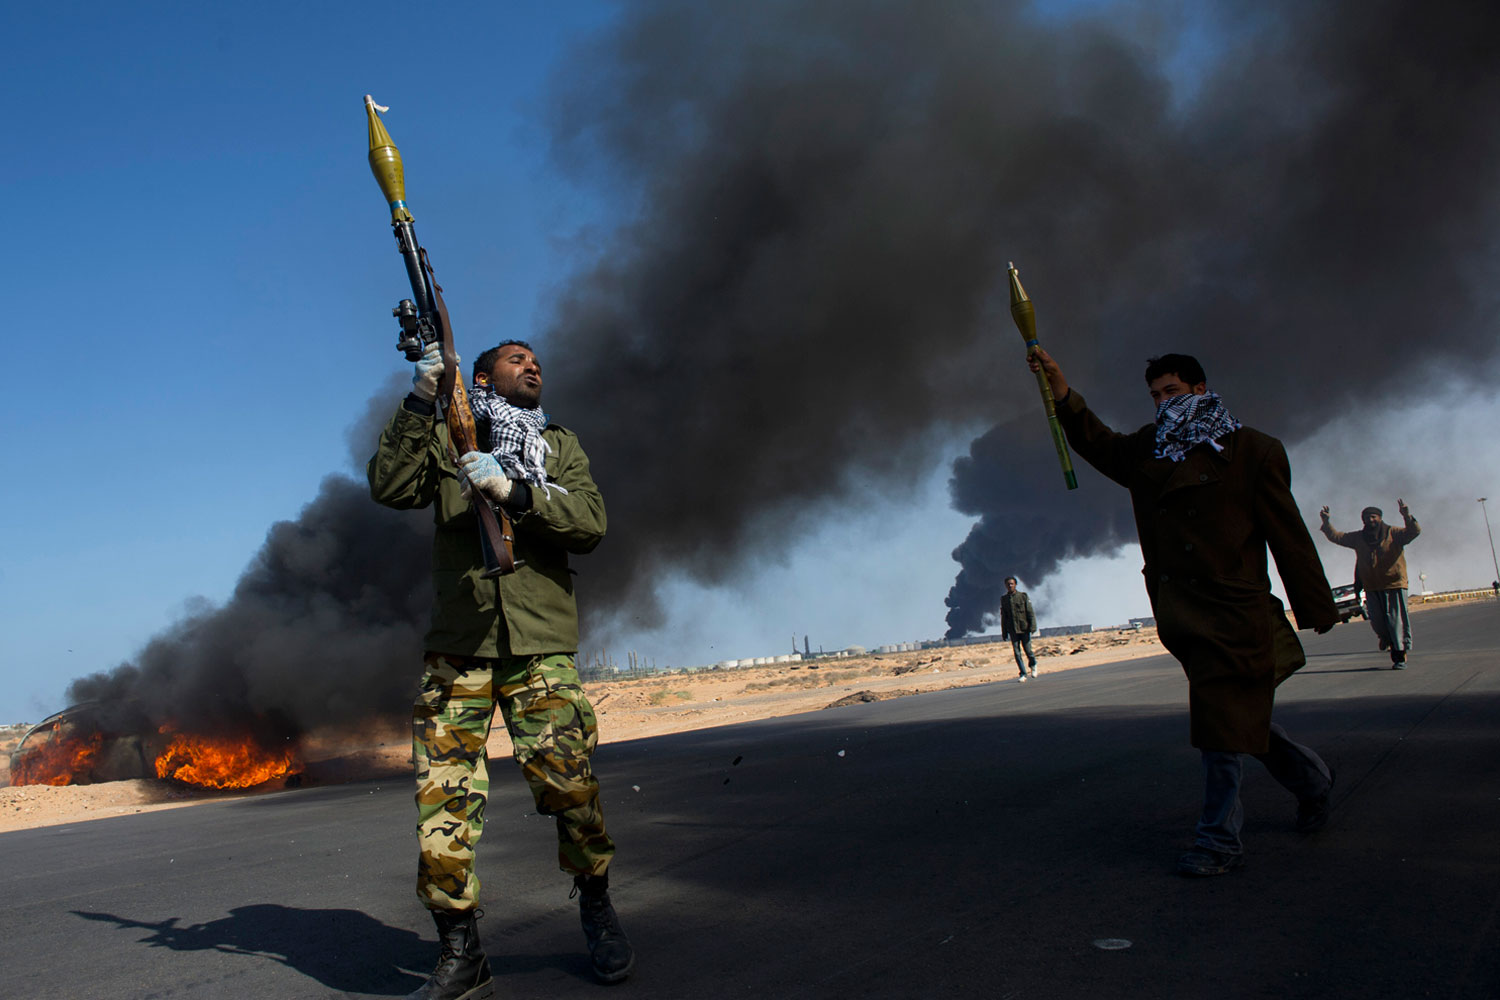 March 11, 2011. Opposition troops burn tires to use as cover during heavy fighting, shelling and airstrikes near the main checkpoint near a refinery as rebel troops pull back from Ras Lanuf, in Eastern Libya.